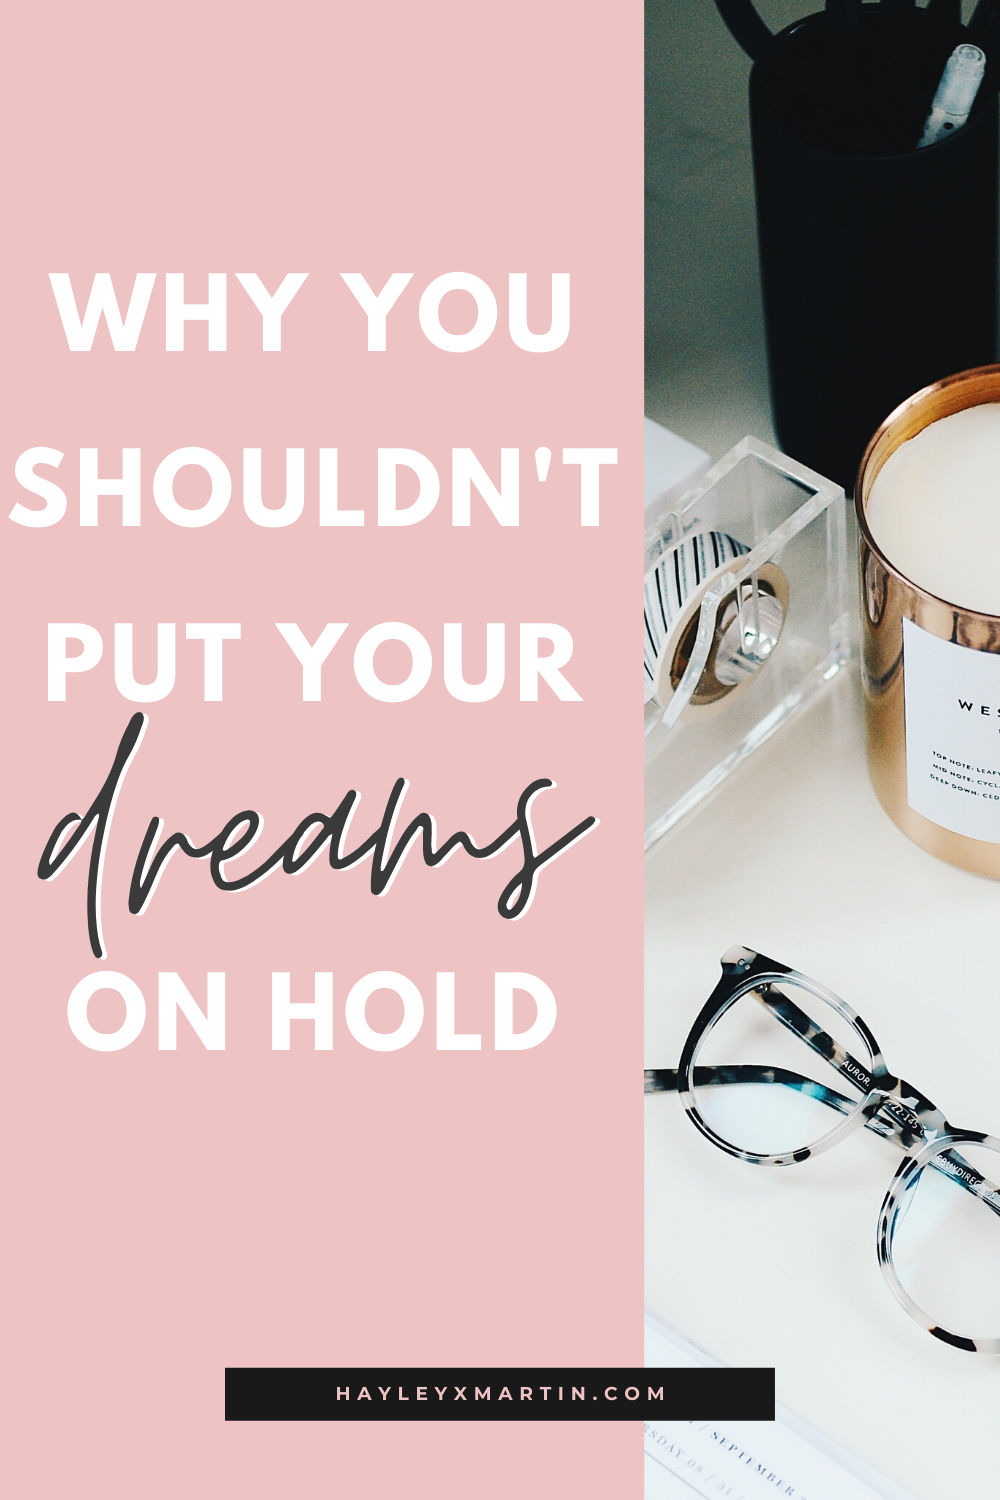 WHY YOU SHOULDN'T PUT YOUR DREAMS ON HOLD | HAYLEYXMARTIN